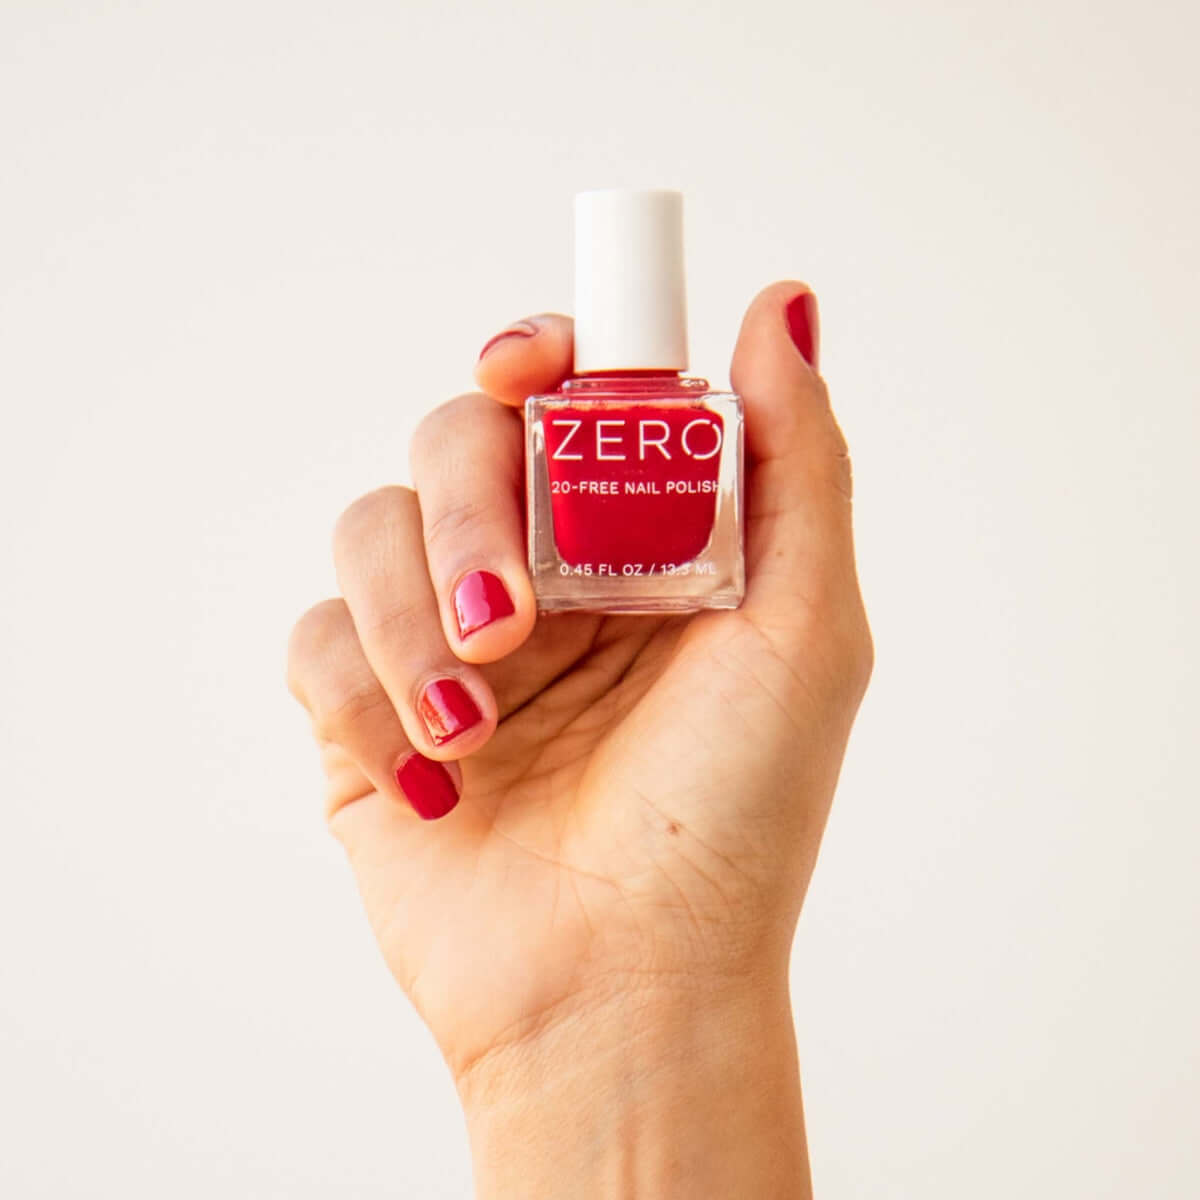 100% Pure Red Over Heels Nail Polish